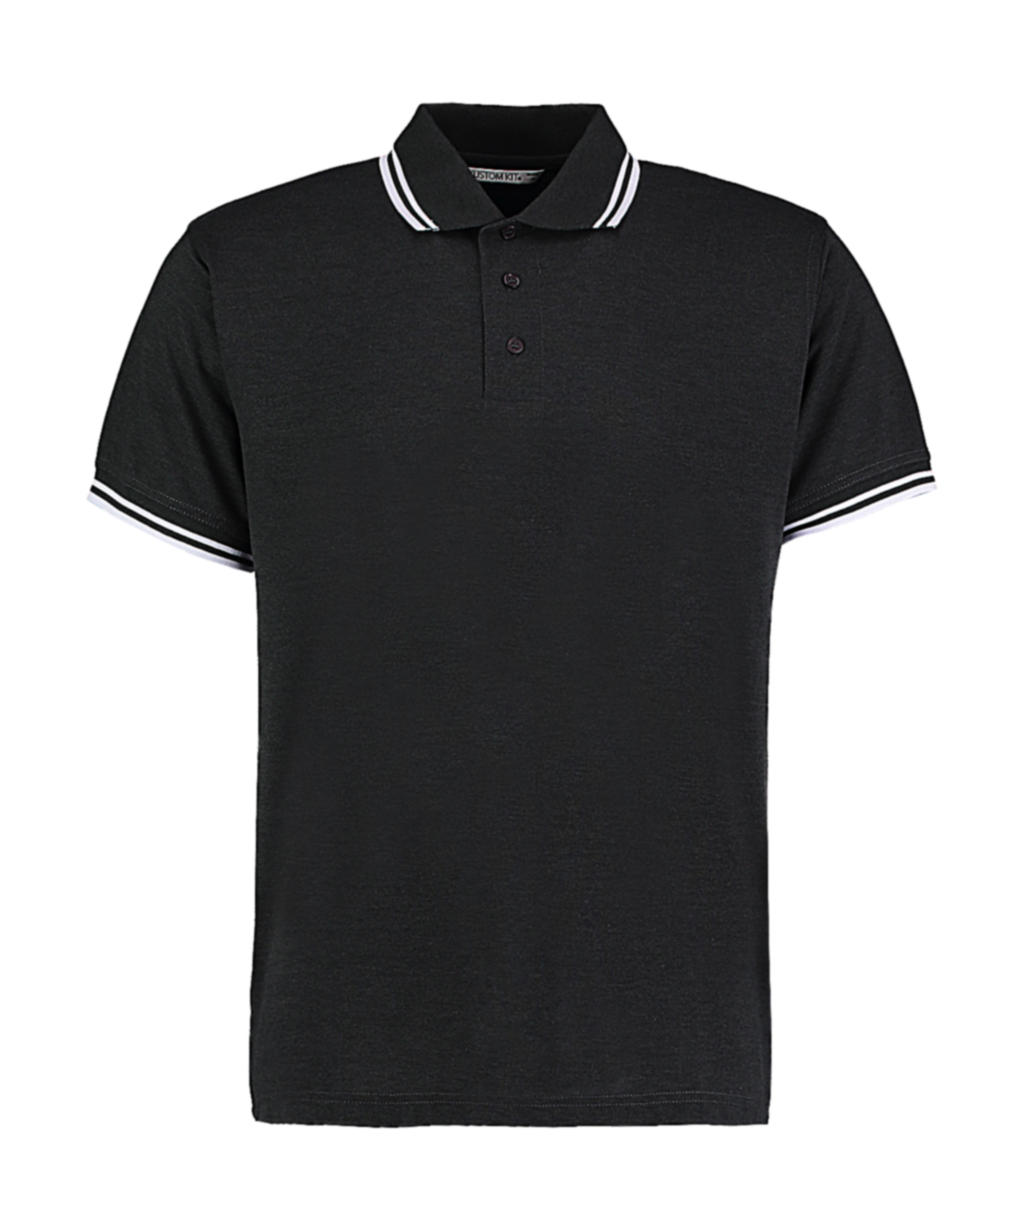  Classic Fit Tipped Collar Polo in Farbe Graphite/White